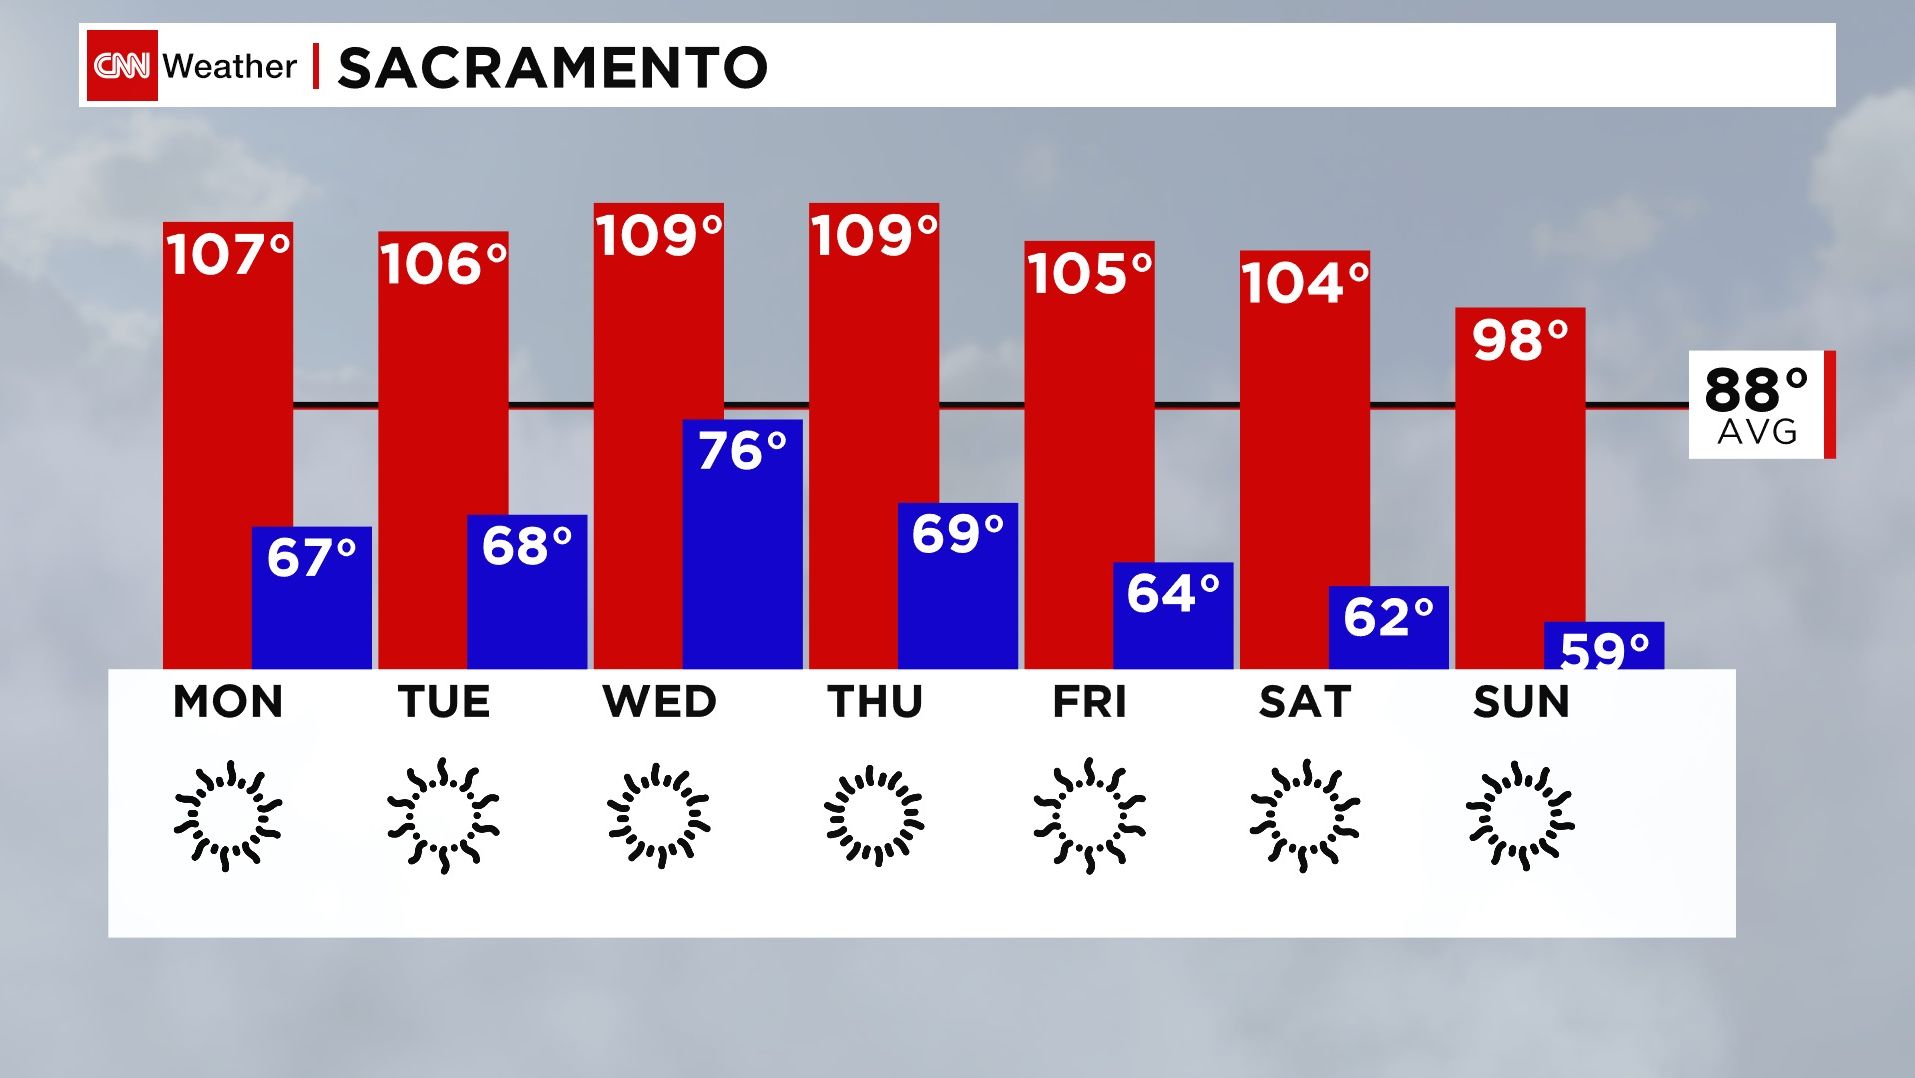 High temperatures looking to surpass the new record of 106 degrees on Sunday.